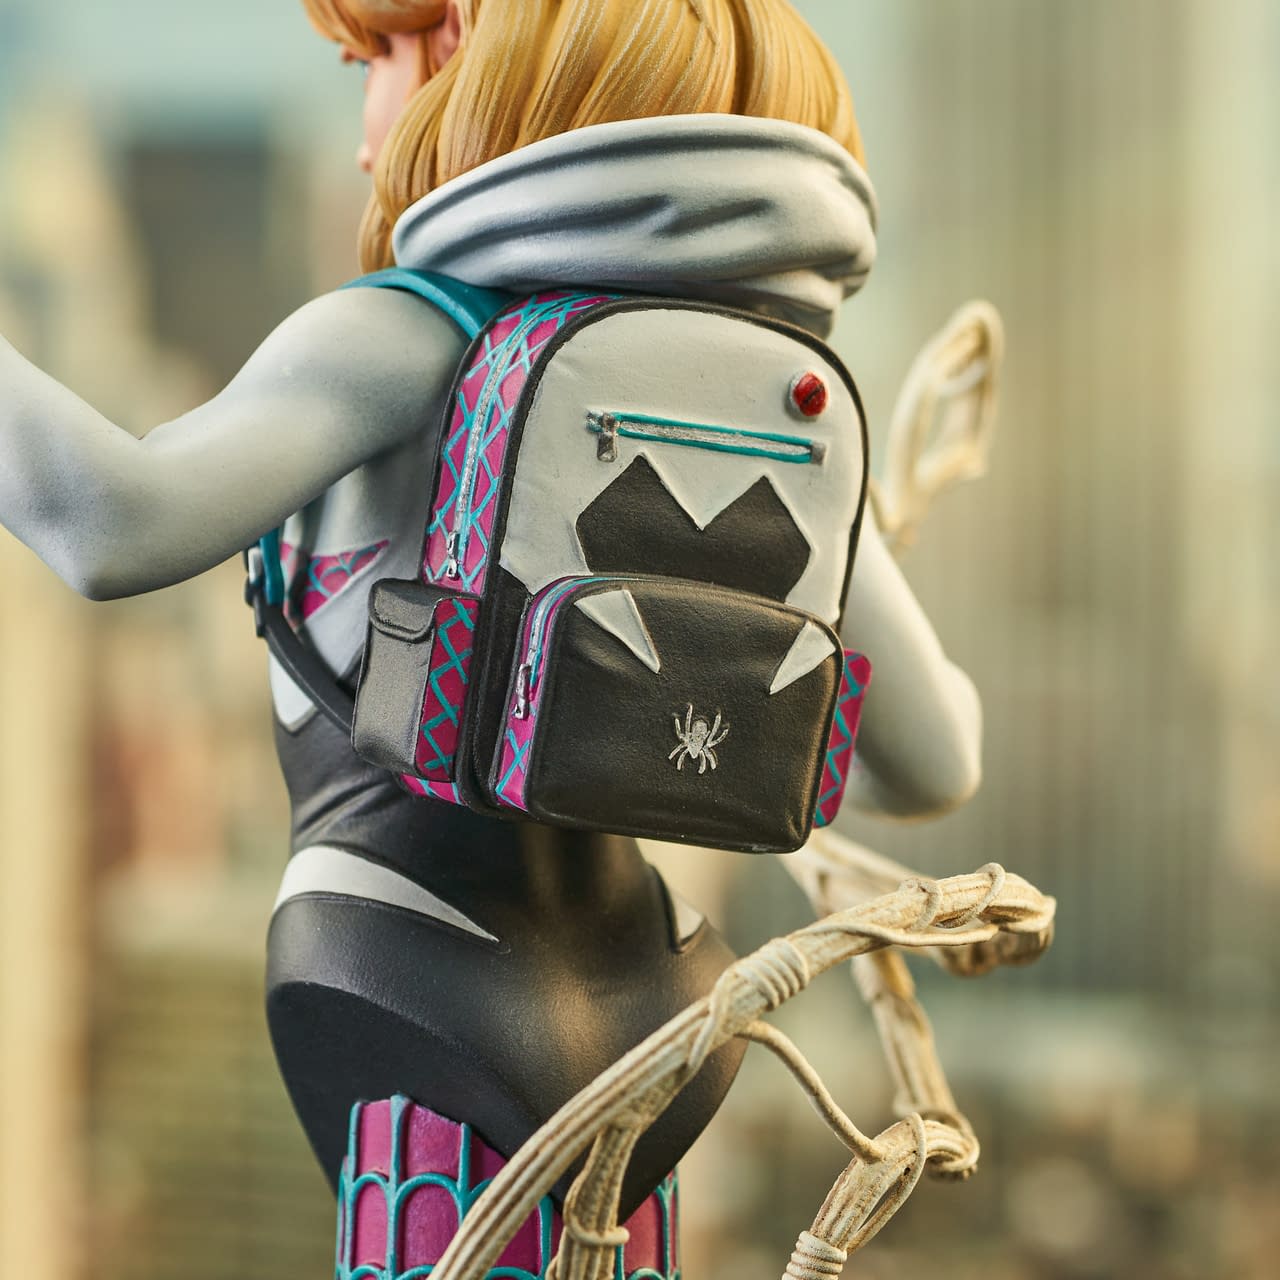 Spider-Gwen Gets a Limited Edition Statue from Diamond Select Toys